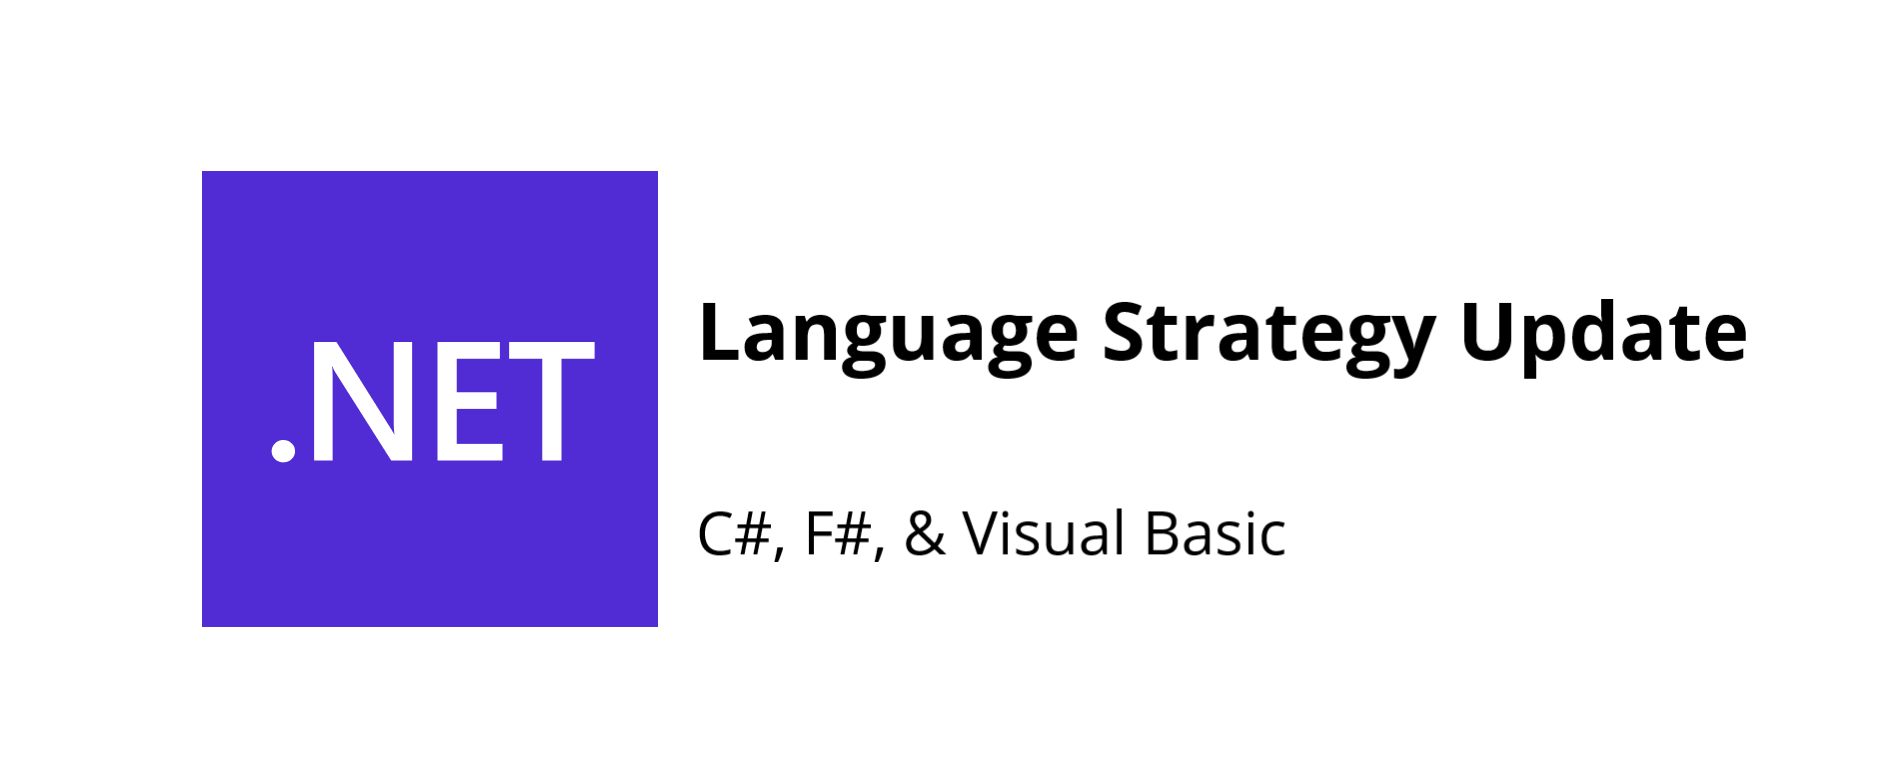 Interested in what is going on and the future of .NET languages, (C#, F#, and Visual Basic)? We have just published an updated version of the .NET Language Strategy on our documentation!